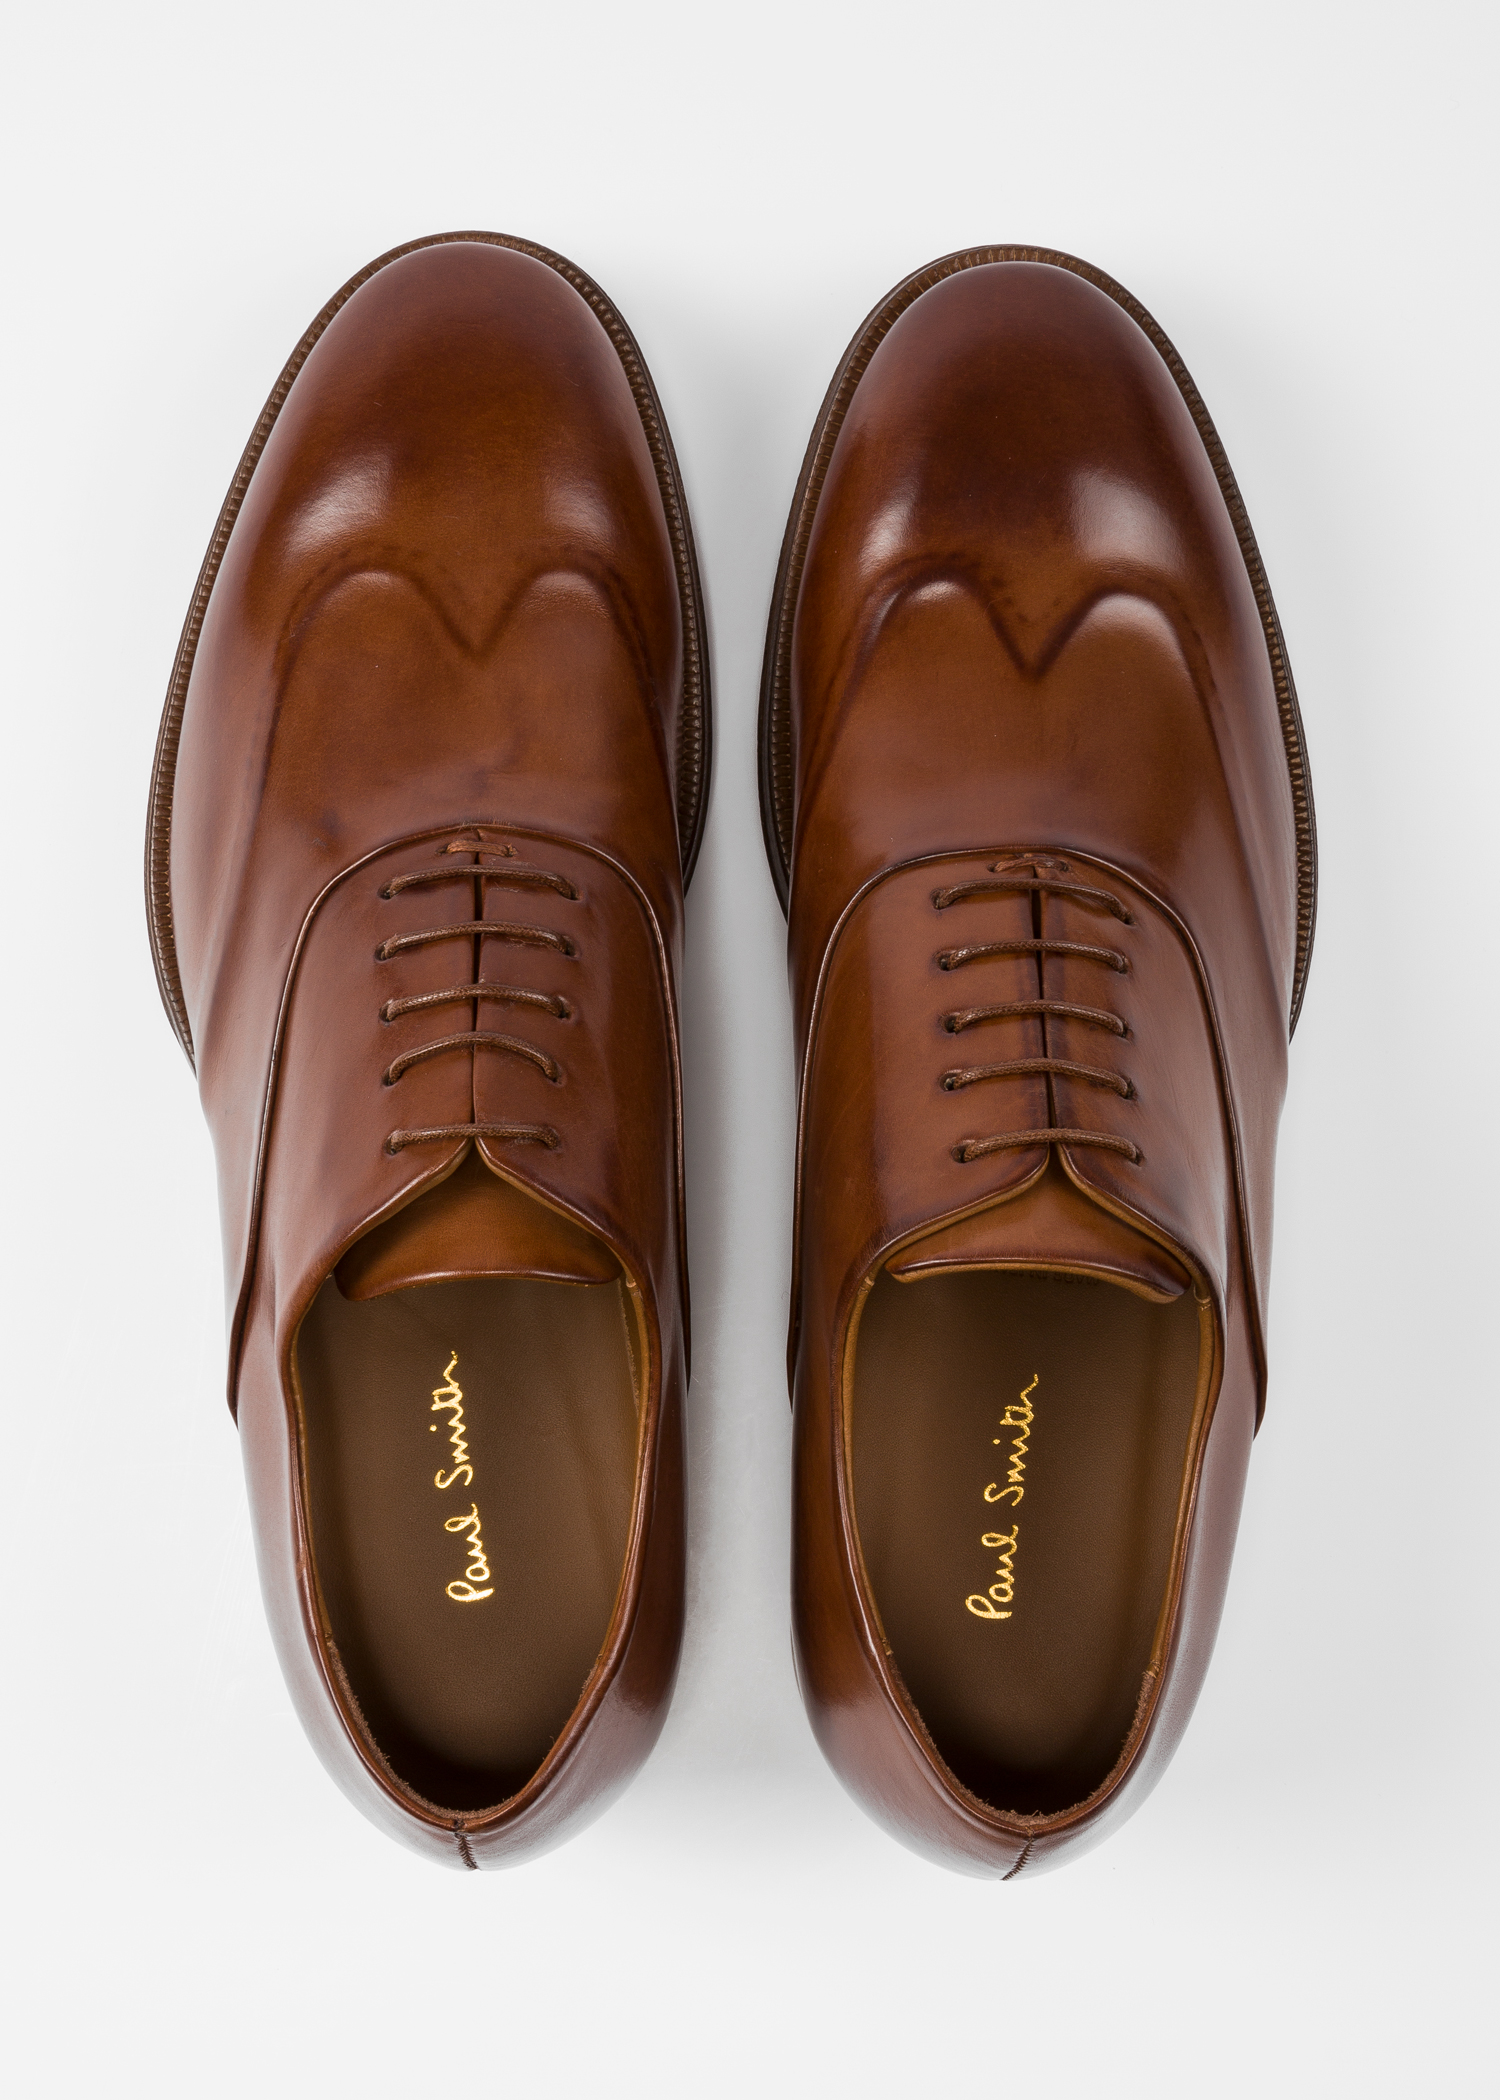 Men's Tan Calf Leather 'Lomax' Oxford Shoes Paul Smith